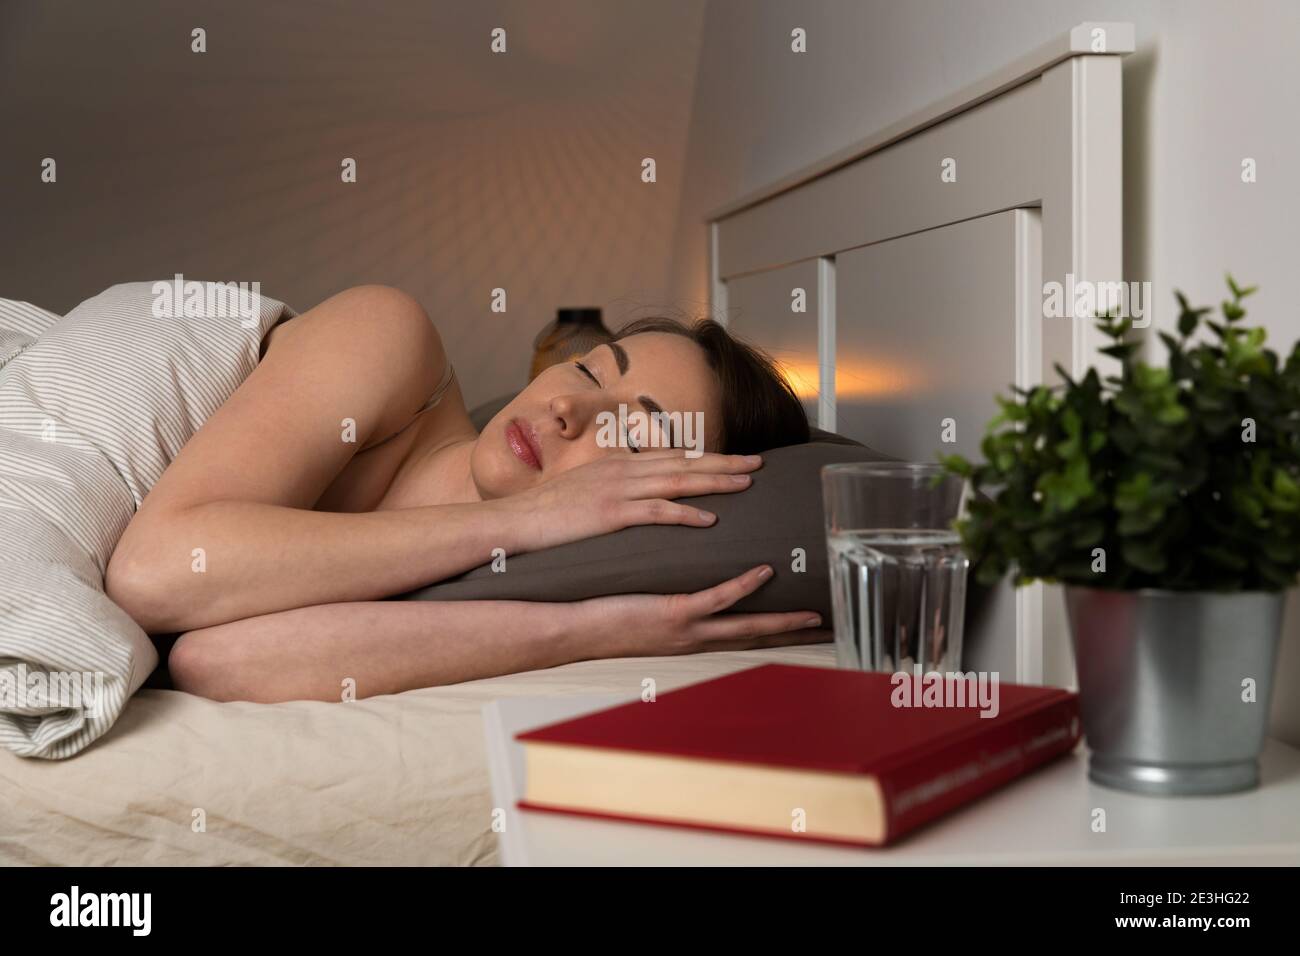 Young women sleeping in bed with a warm light in background and a bedside table in front with clear drinking water and a book. Stock Photo